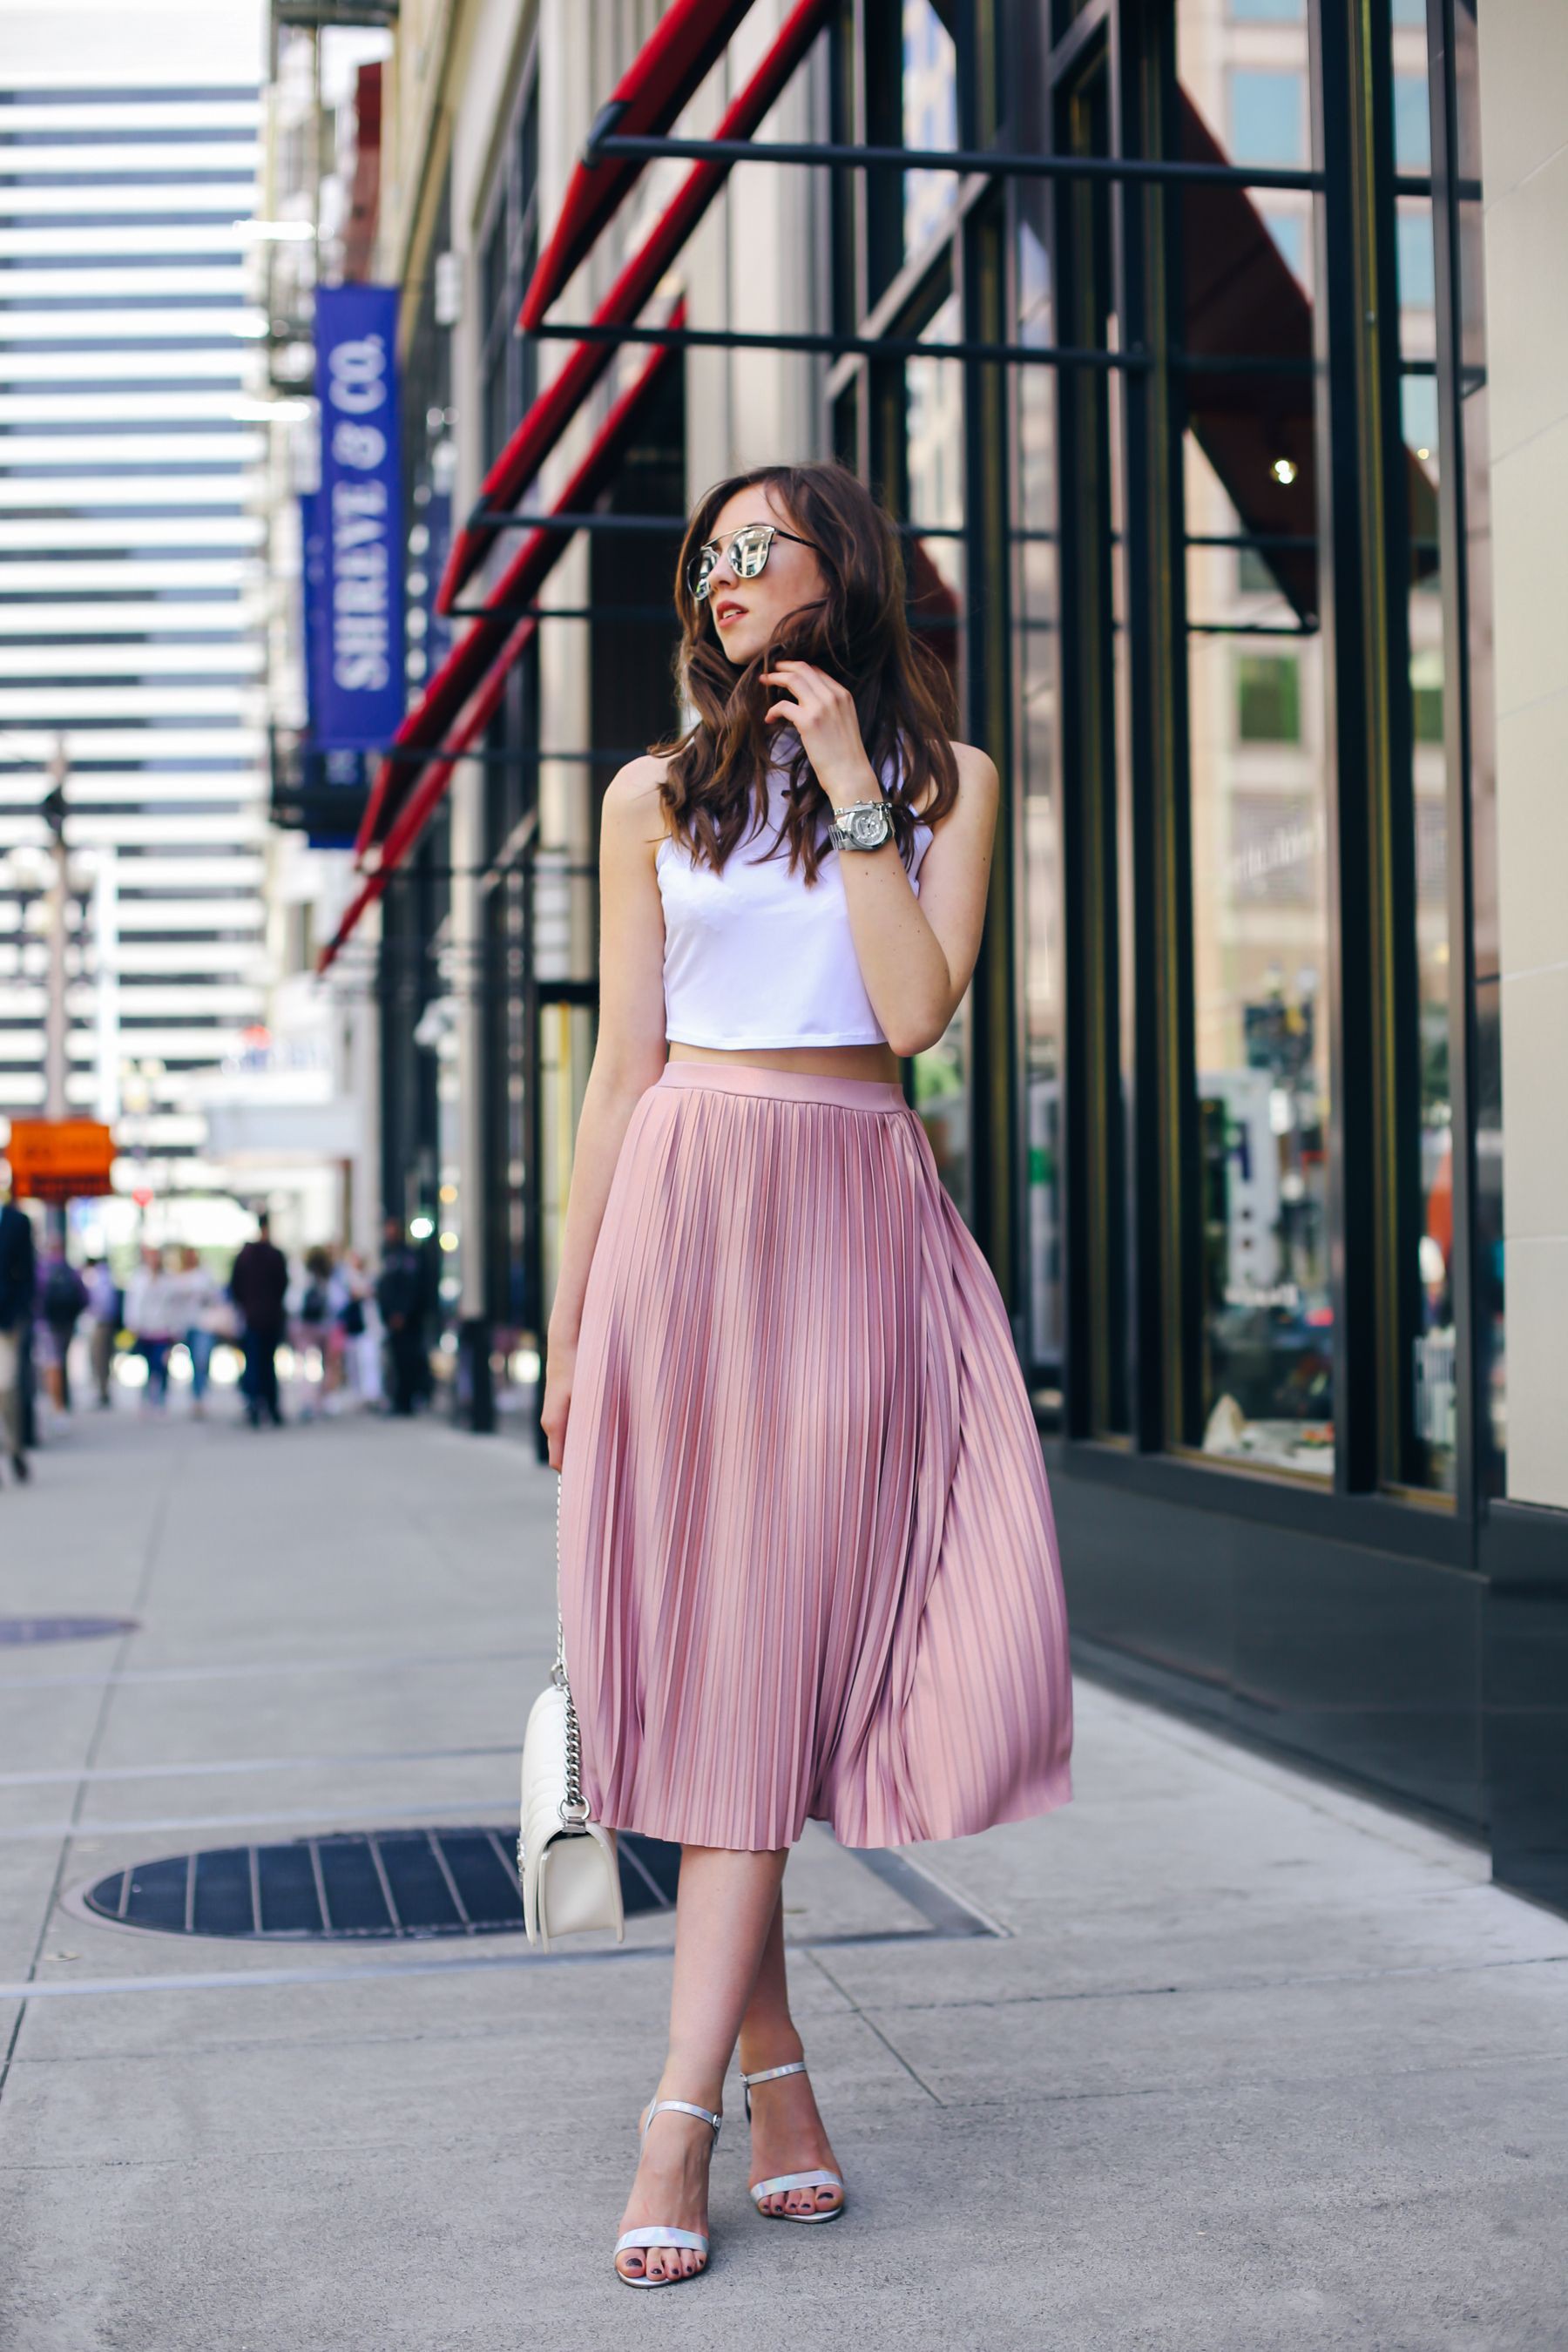 Pairing a pleated skirt, Crop top: Crop top,  Sleeveless shirt,  Skirt Outfits,  Casual Outfits,  Pleated Skirt  